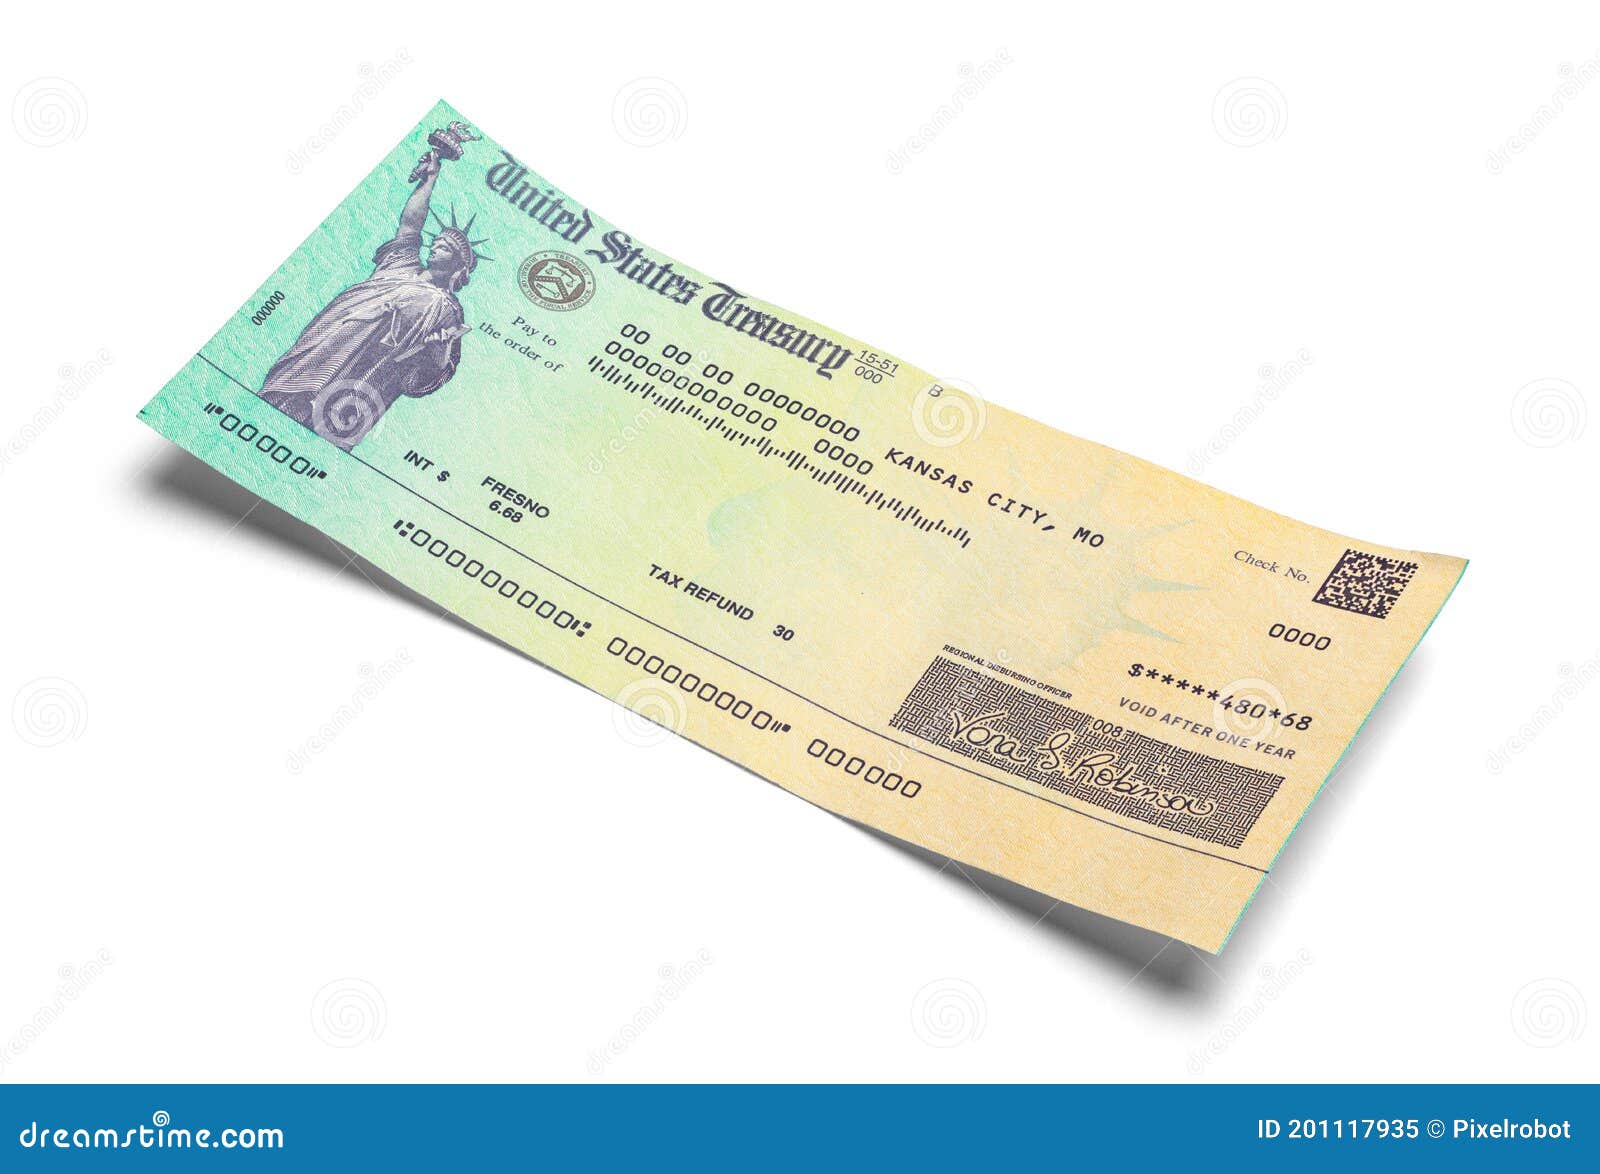 tax-return-refund-check-stock-image-image-of-form-government-201117935